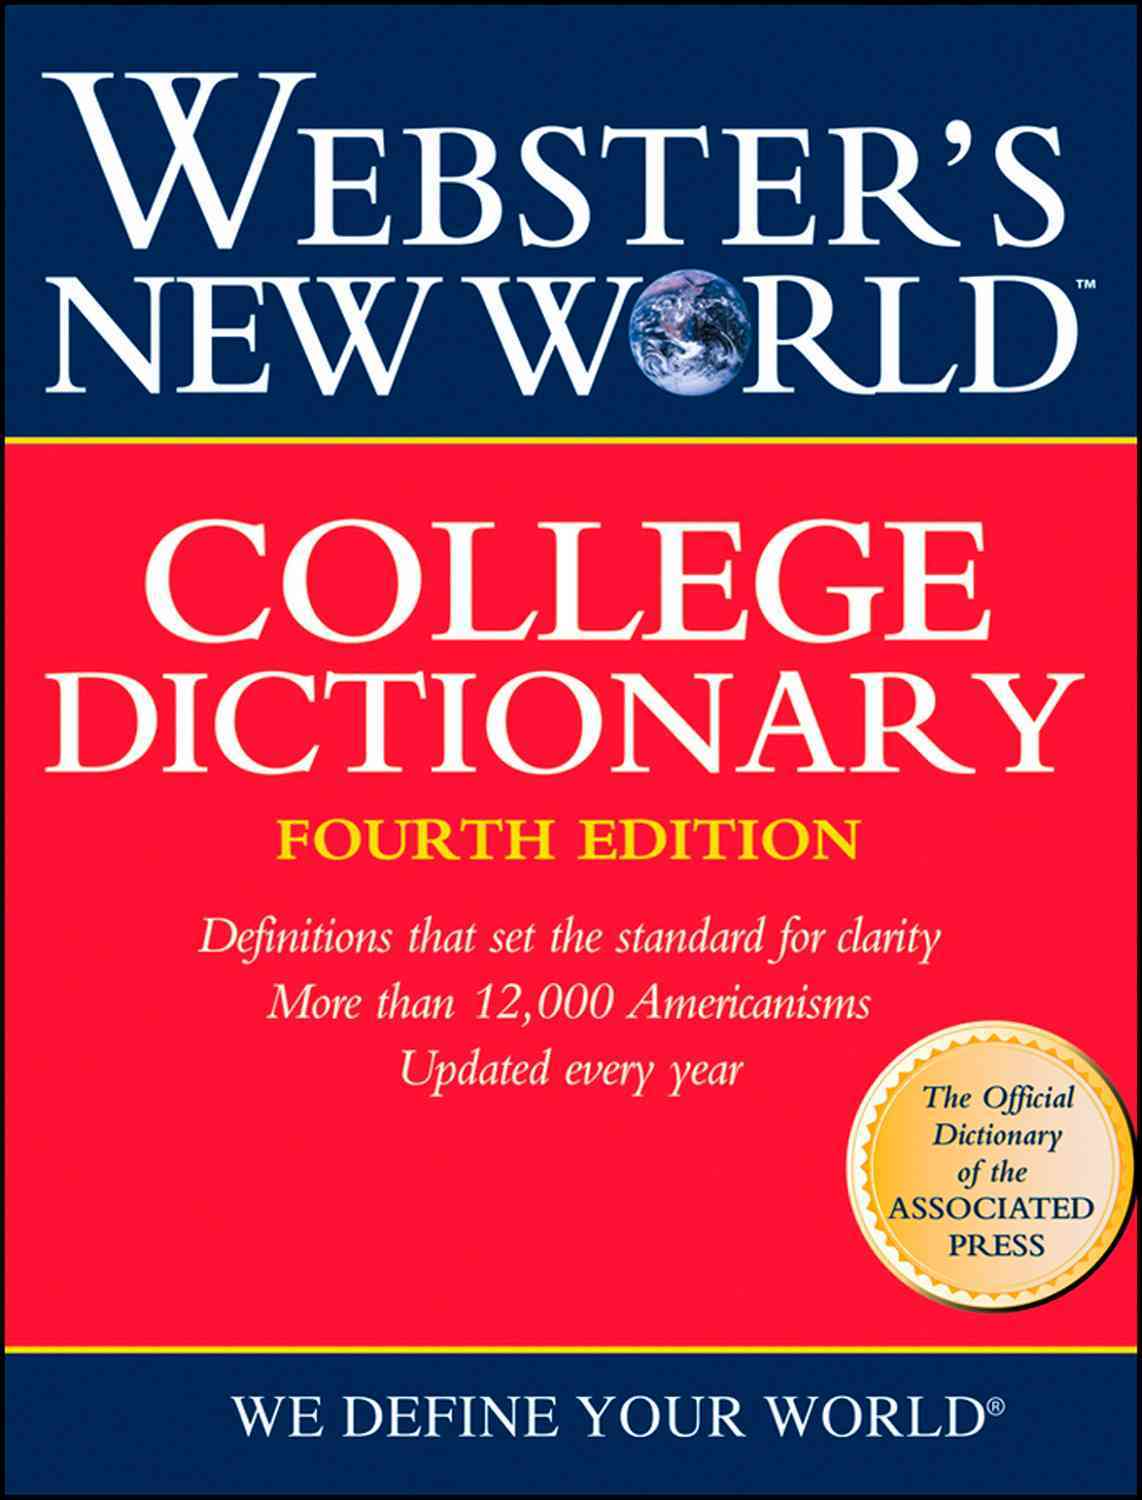 Webster New World Student Dictionary Revised Edition